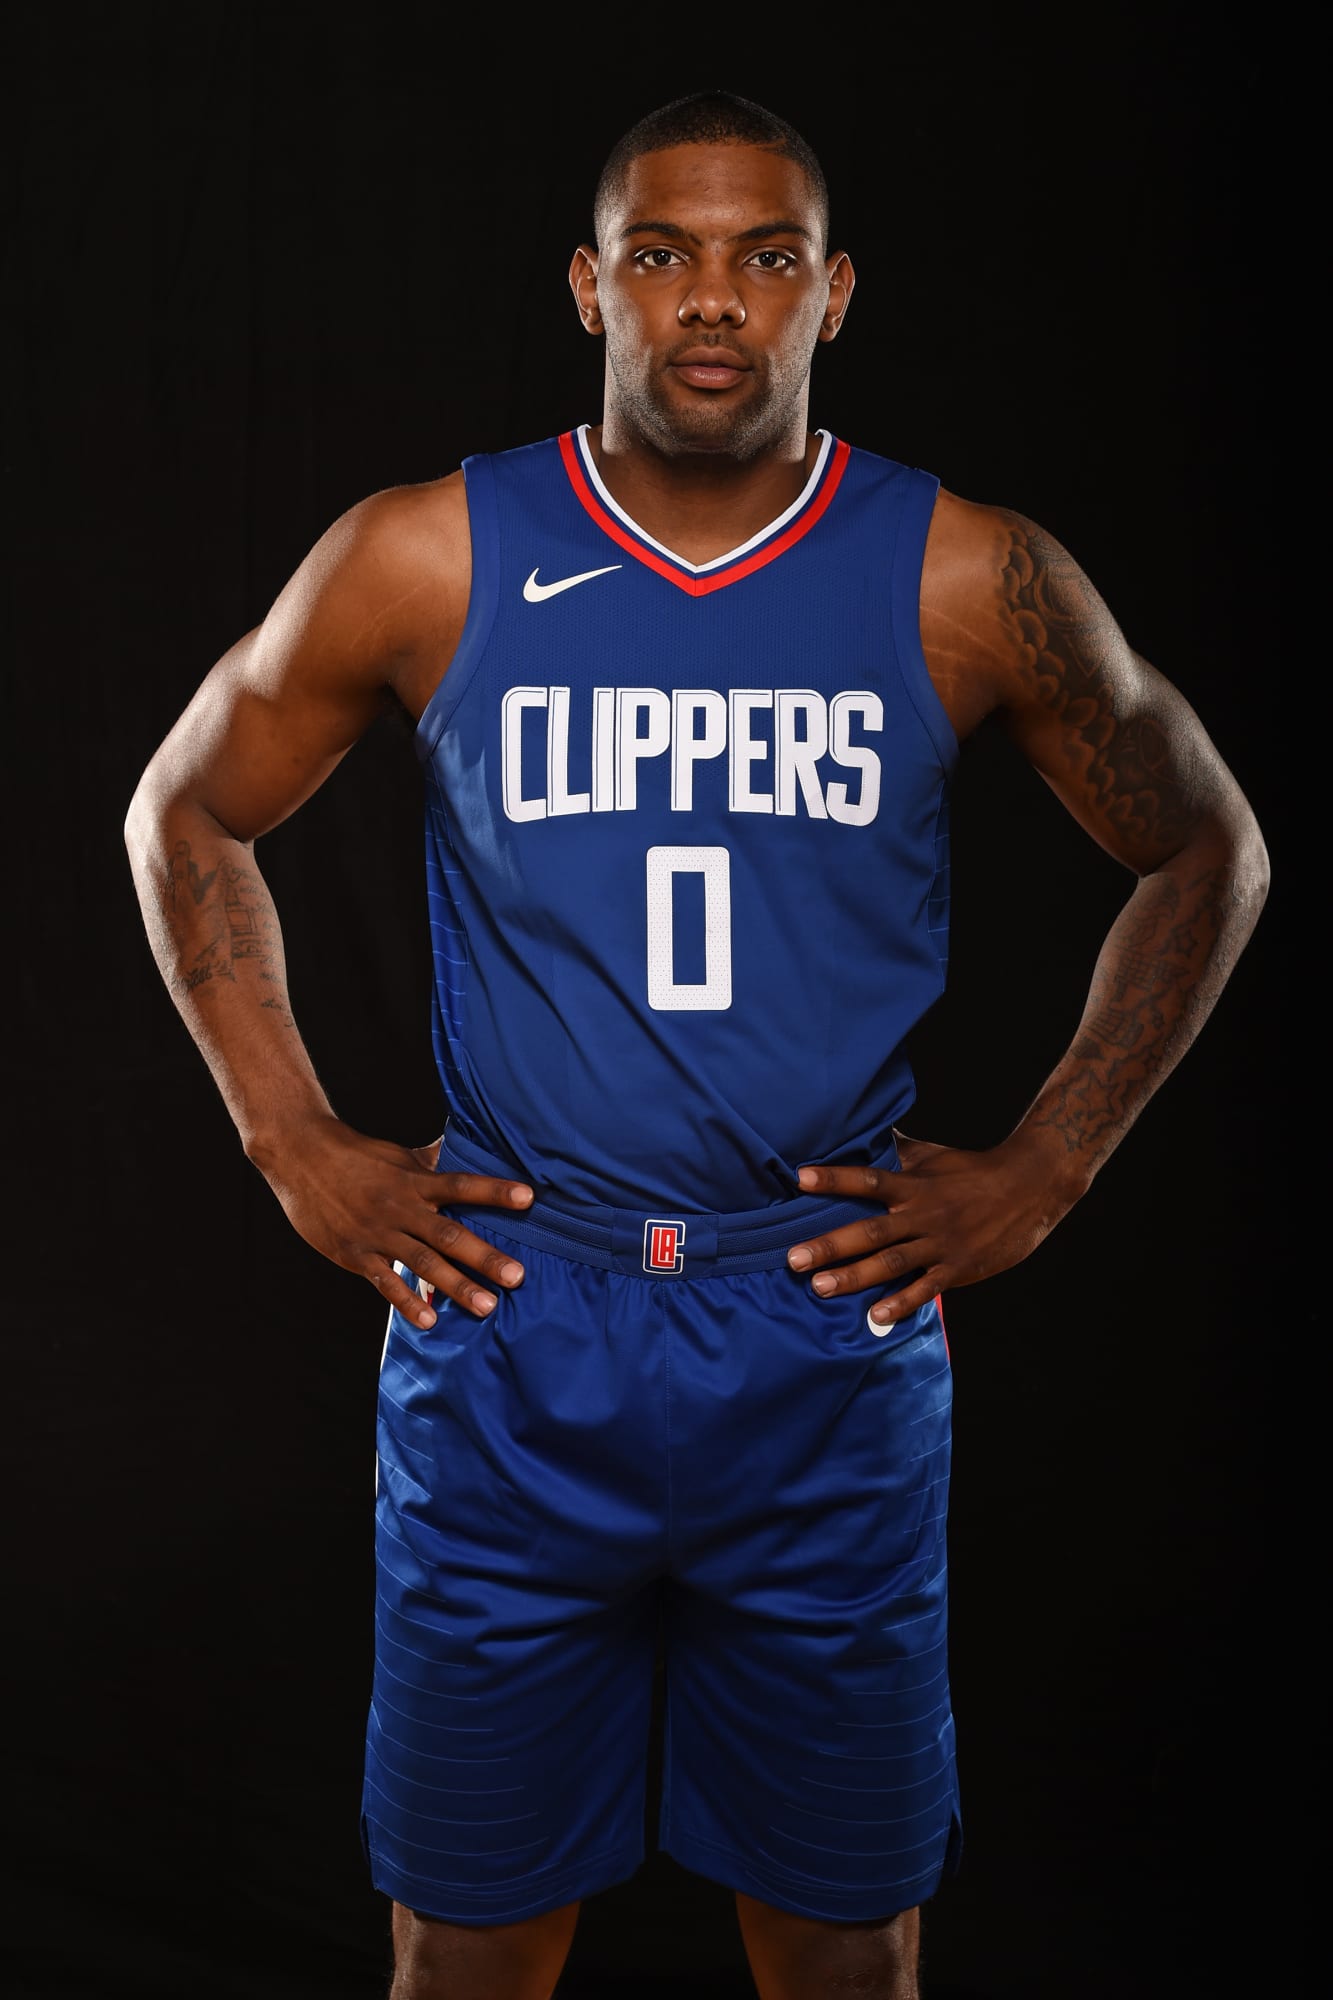 LA Clippers: Ranking the Top 5 Jerseys in Team History